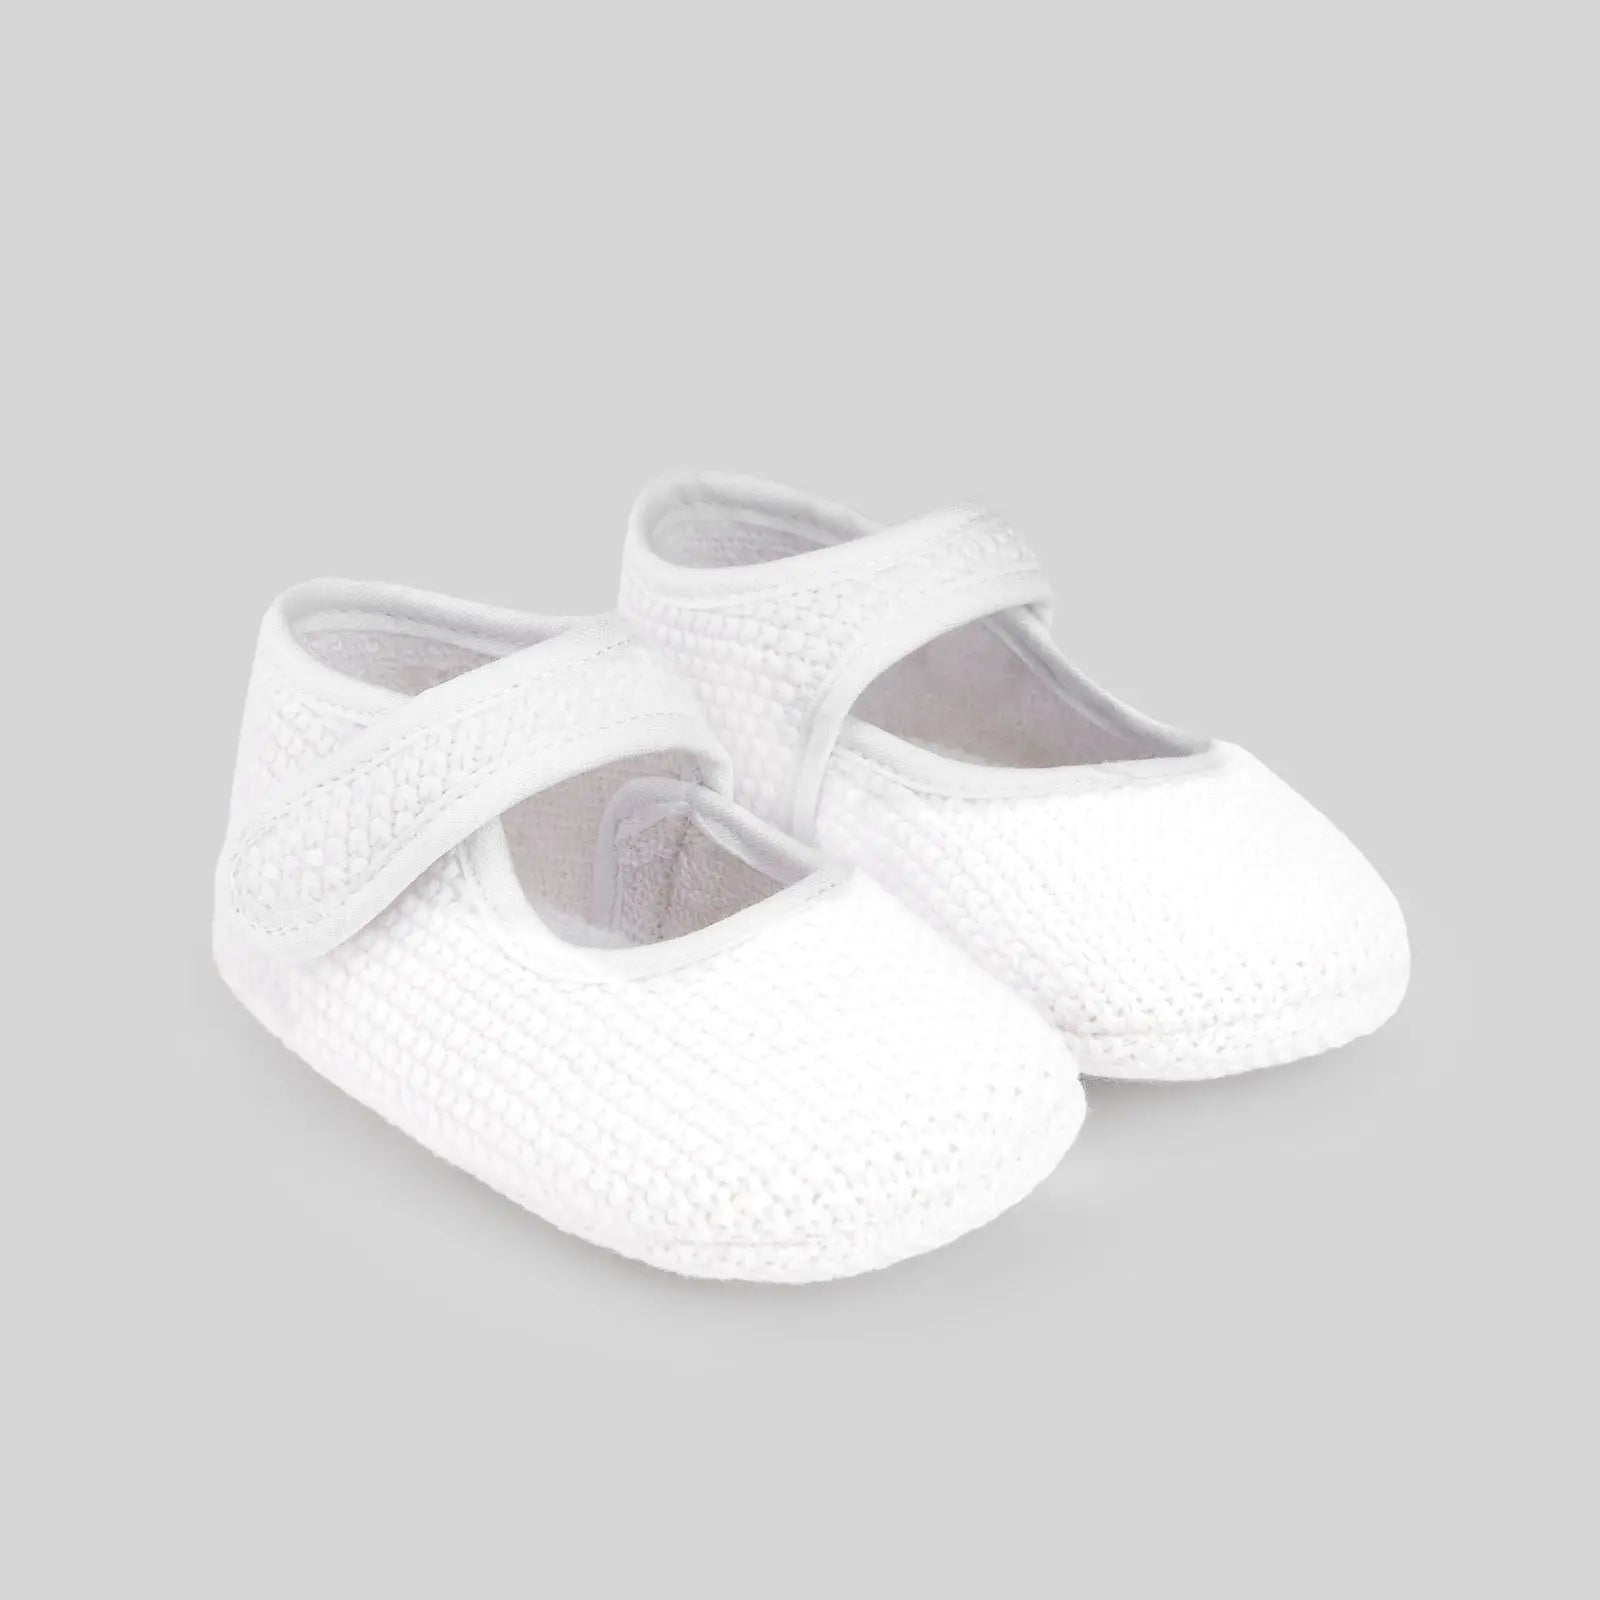 Blue Almonds Ltd Girl's Shoes in White paz rodriguez